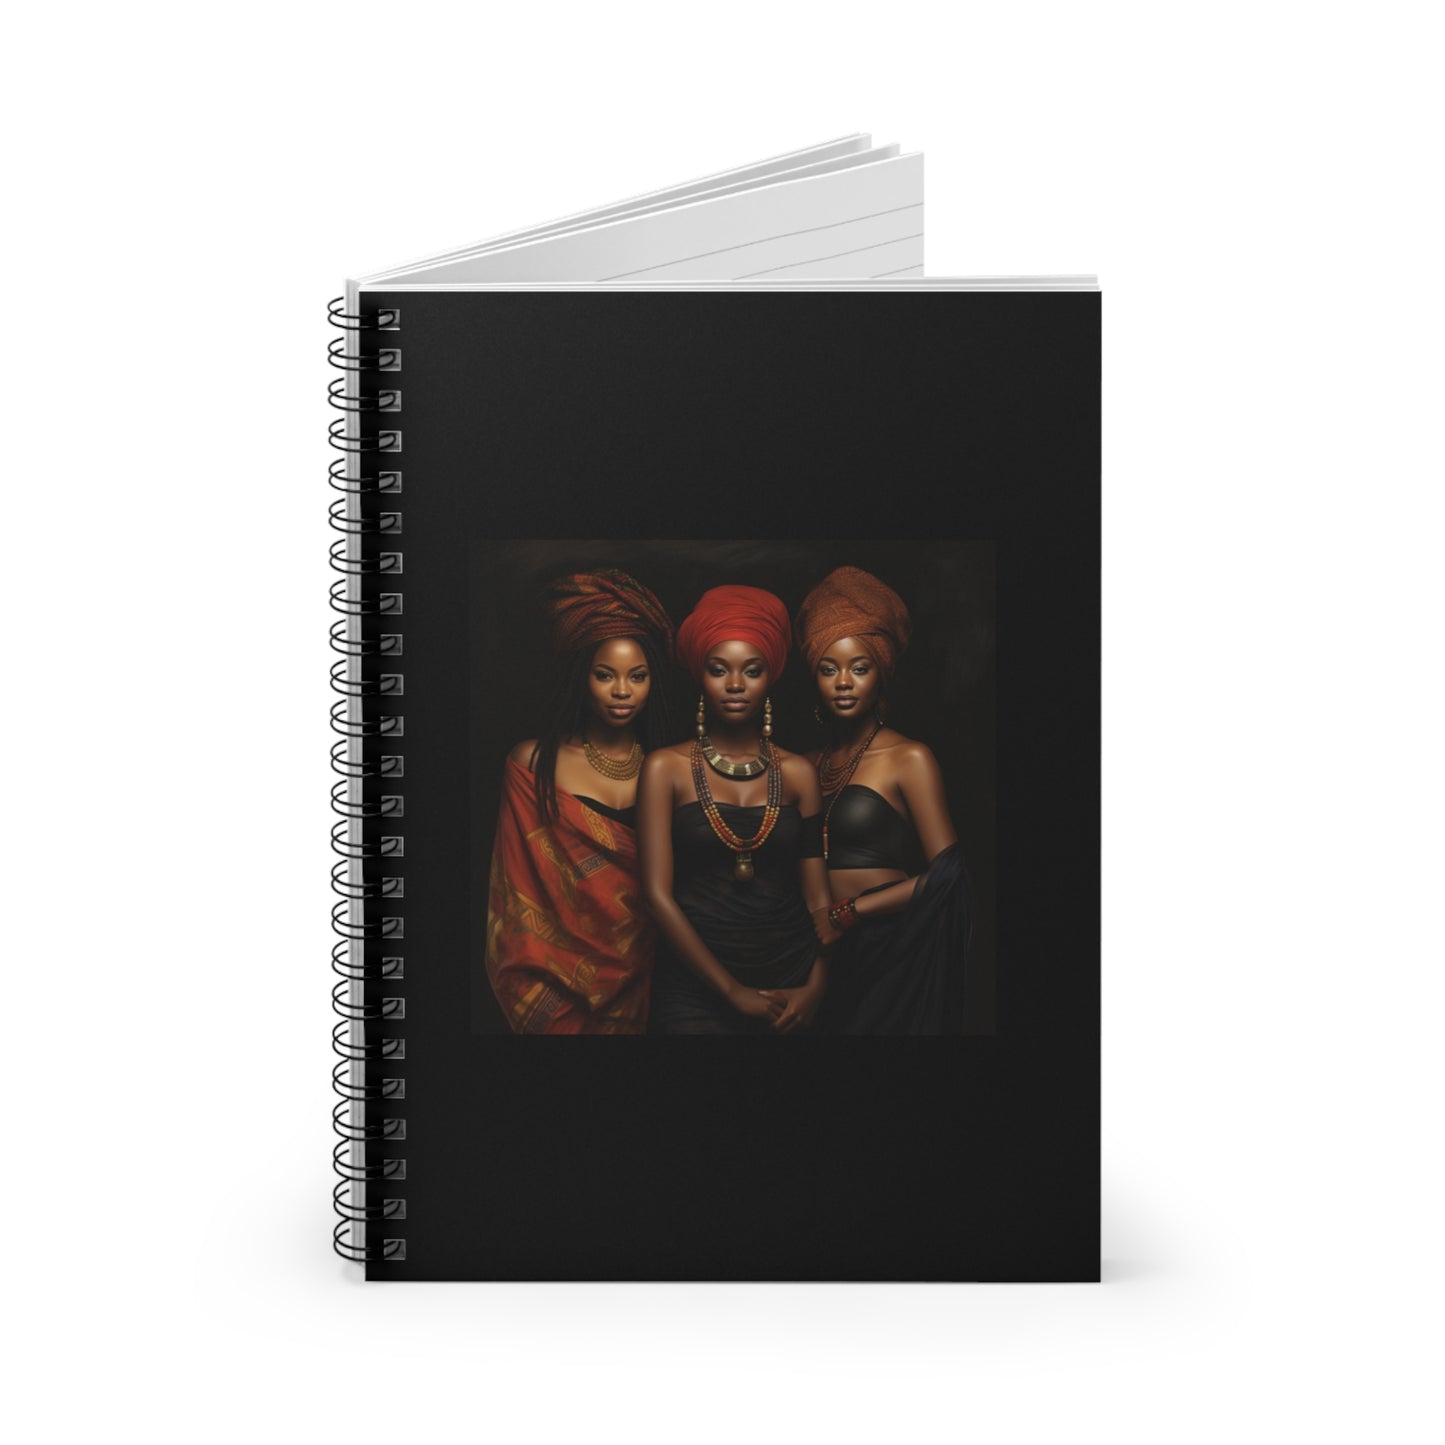 "Echoes of Elegance: Portraits of Grace" Spiral Notebook - Ruled Line